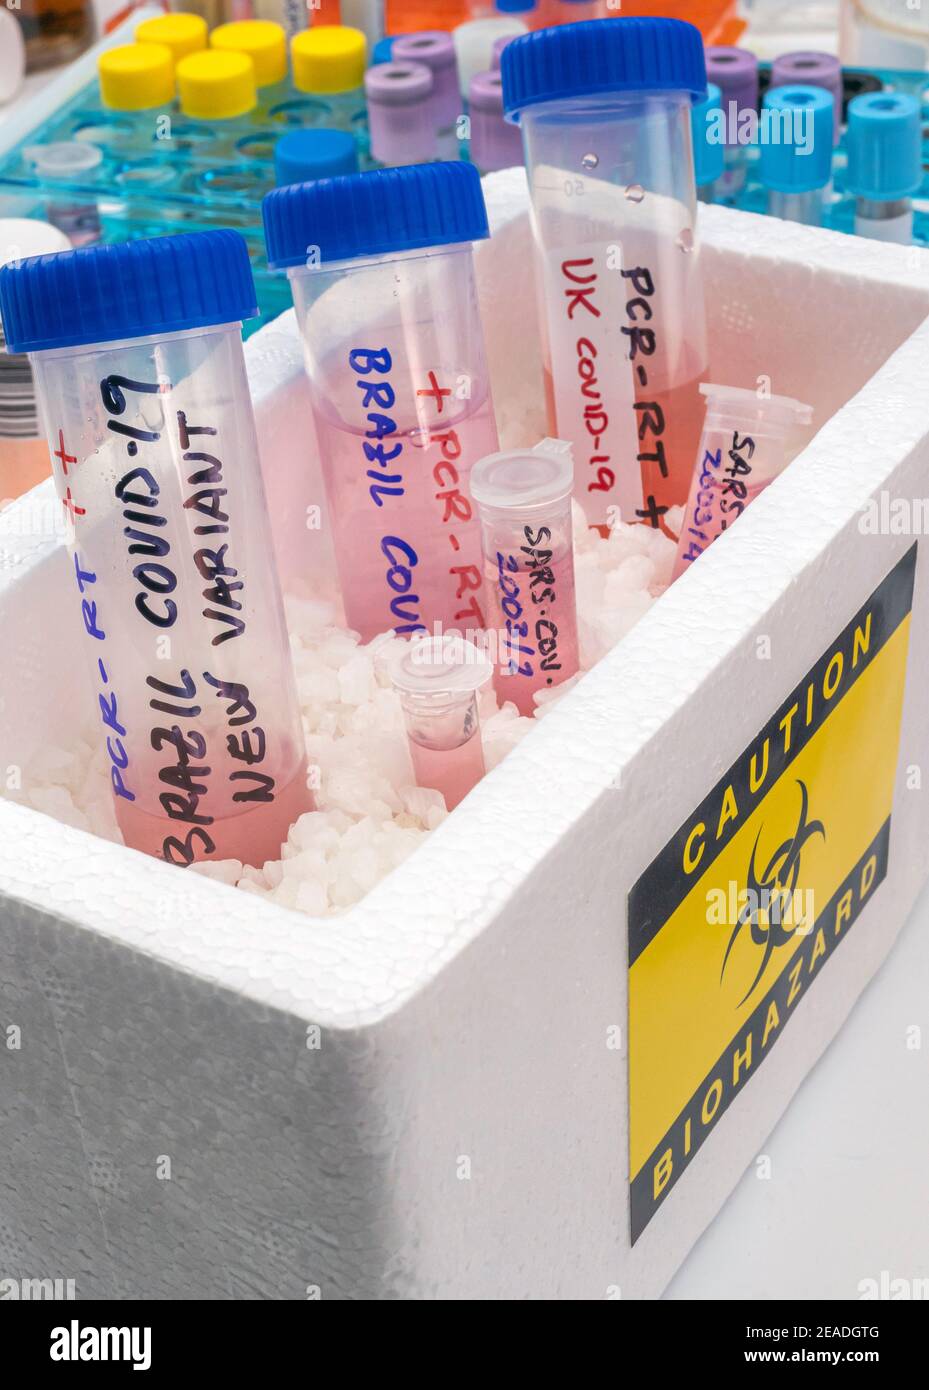 Several frozen vials testing positive for covid-19 infection of the new variant in the UK and Brazil, conceptual image. Stock Photo